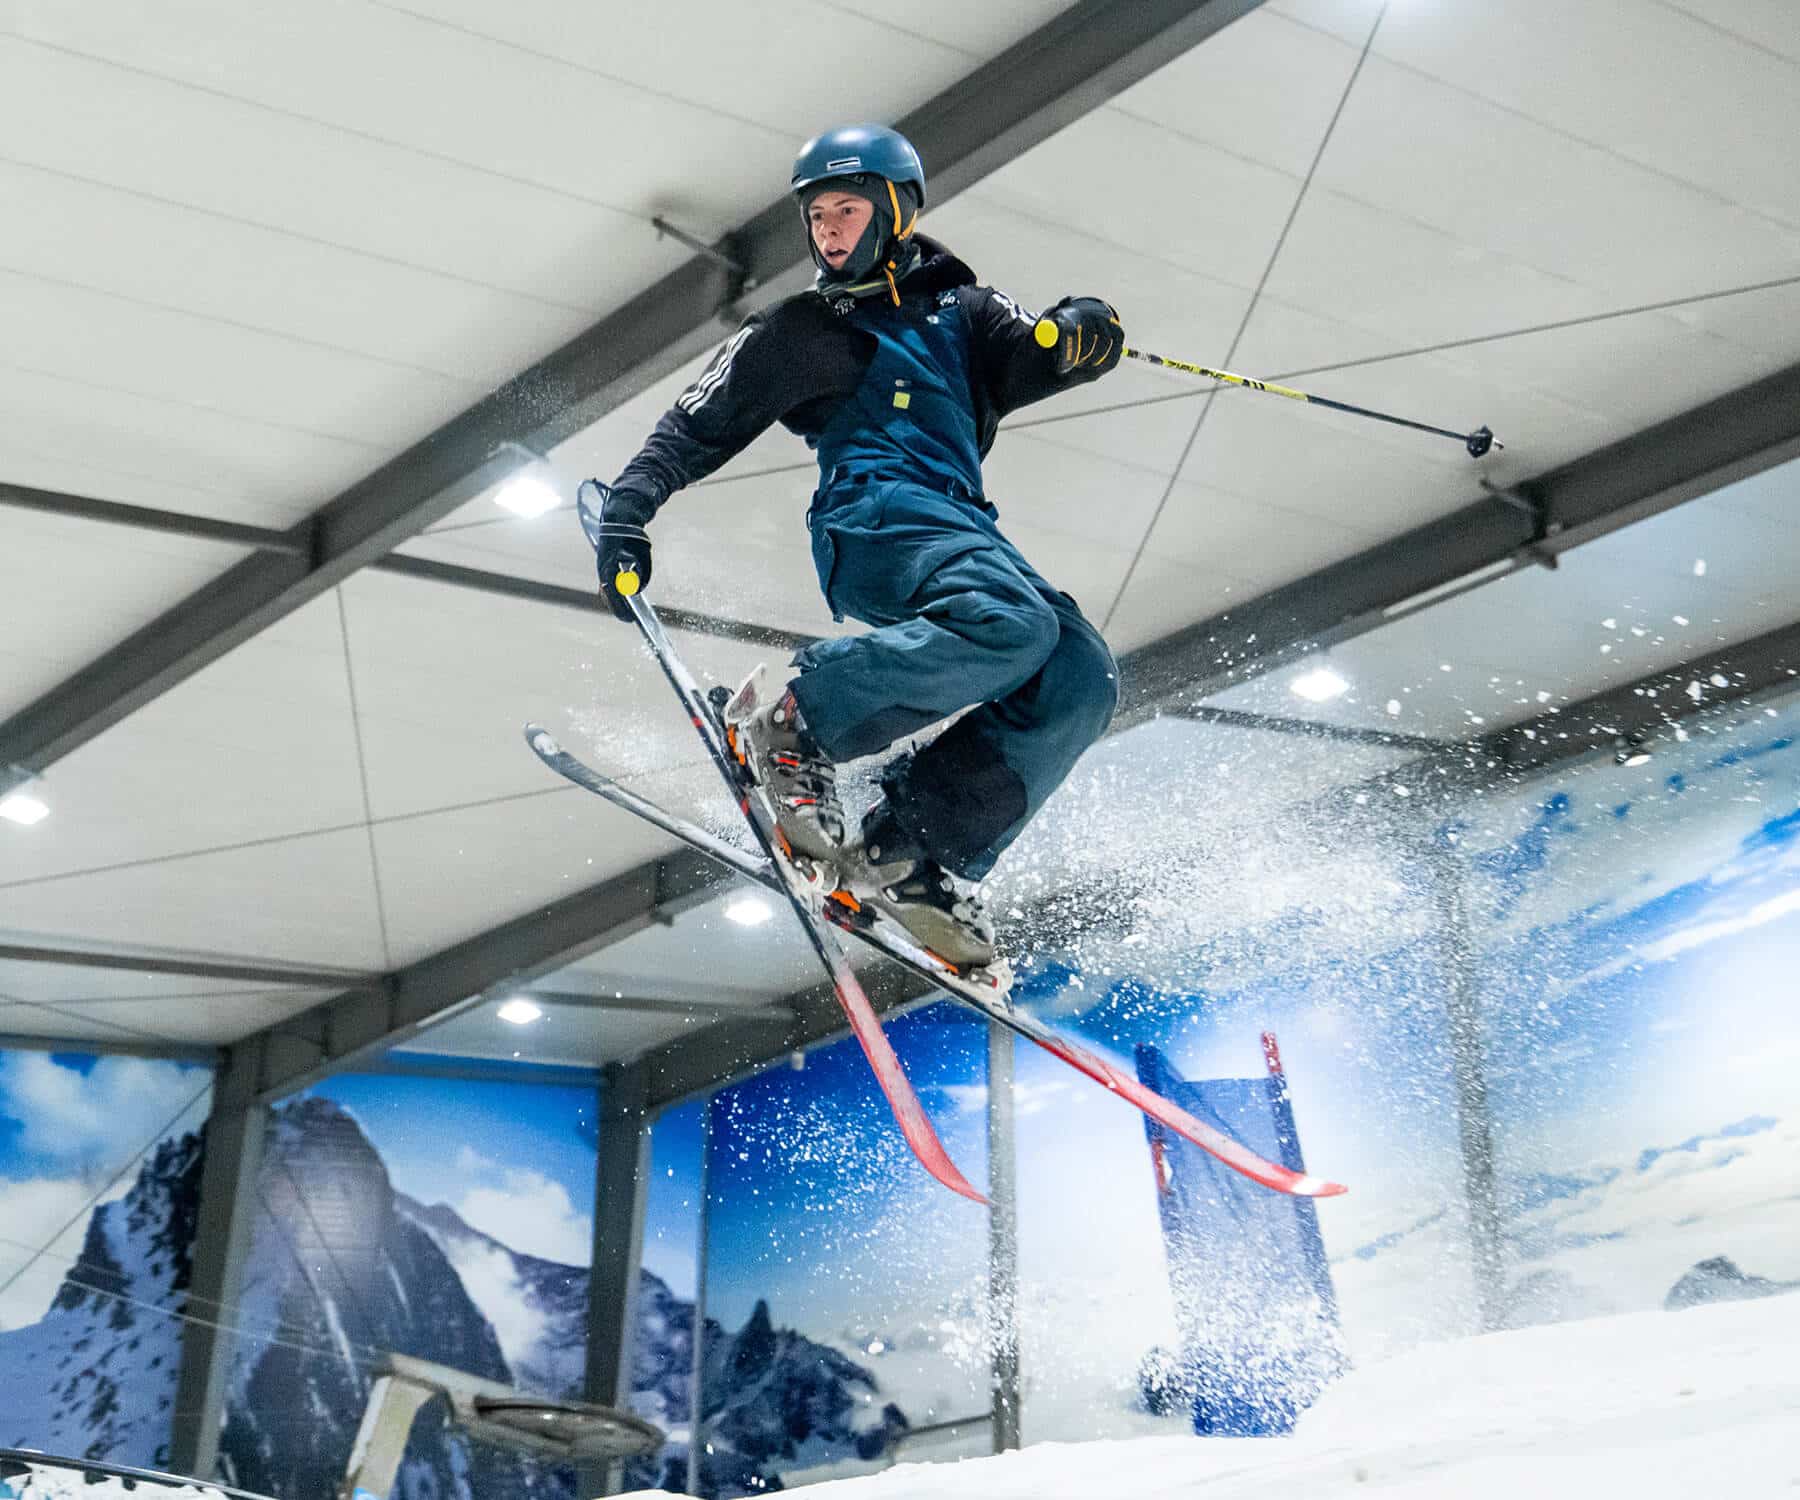 Freestyle skier doing a jump at Snowplanet